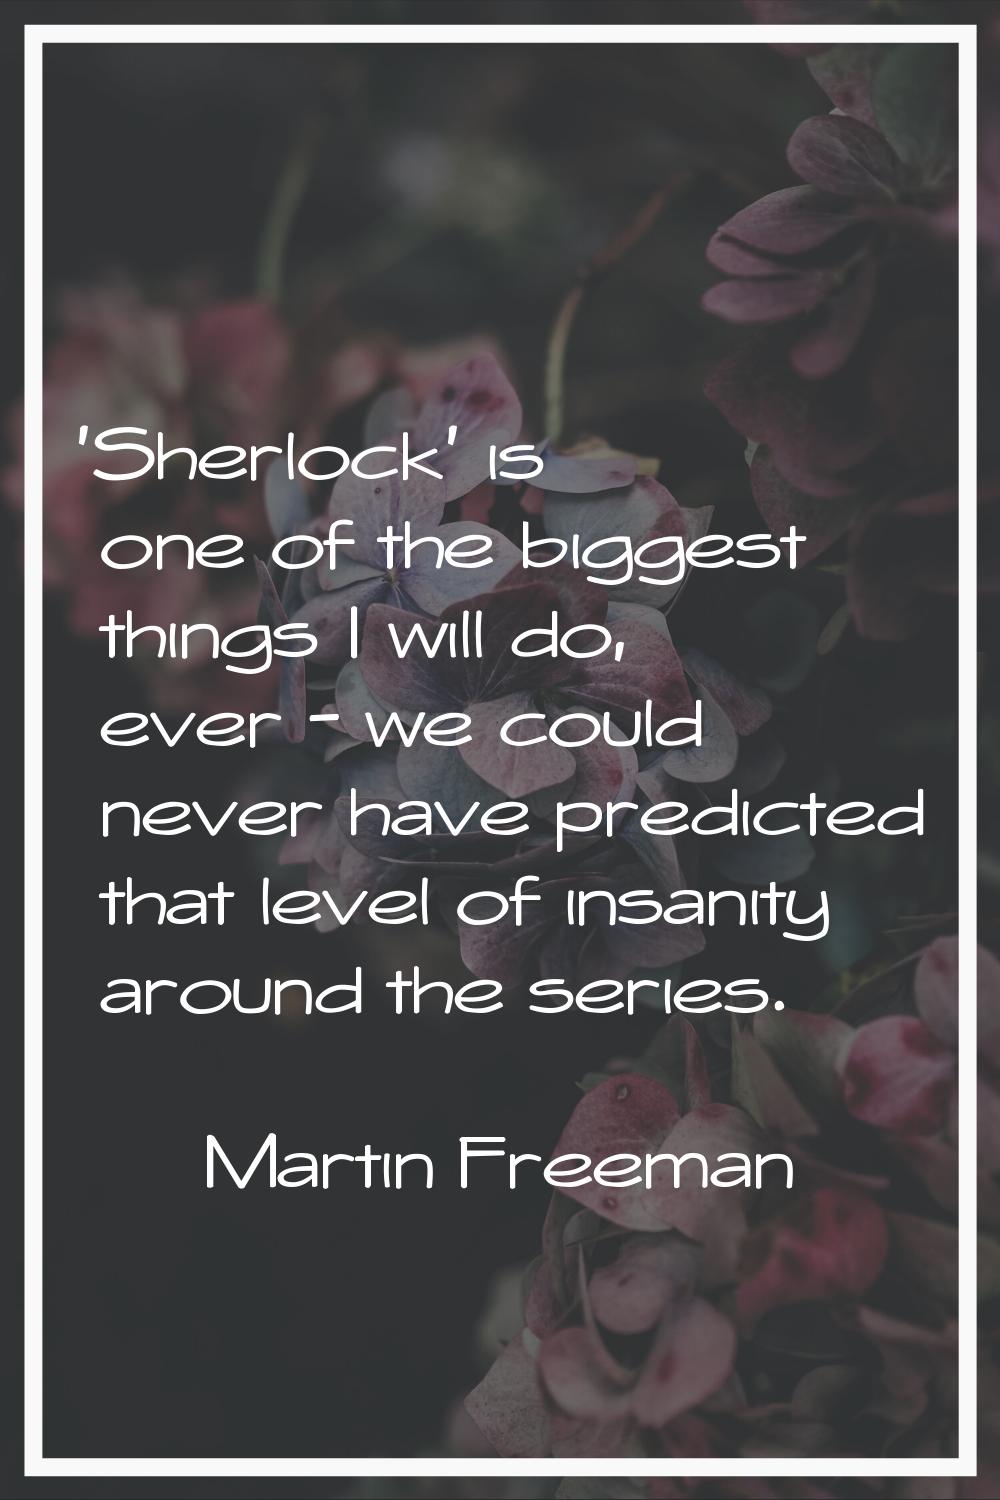 'Sherlock' is one of the biggest things I will do, ever - we could never have predicted that level 